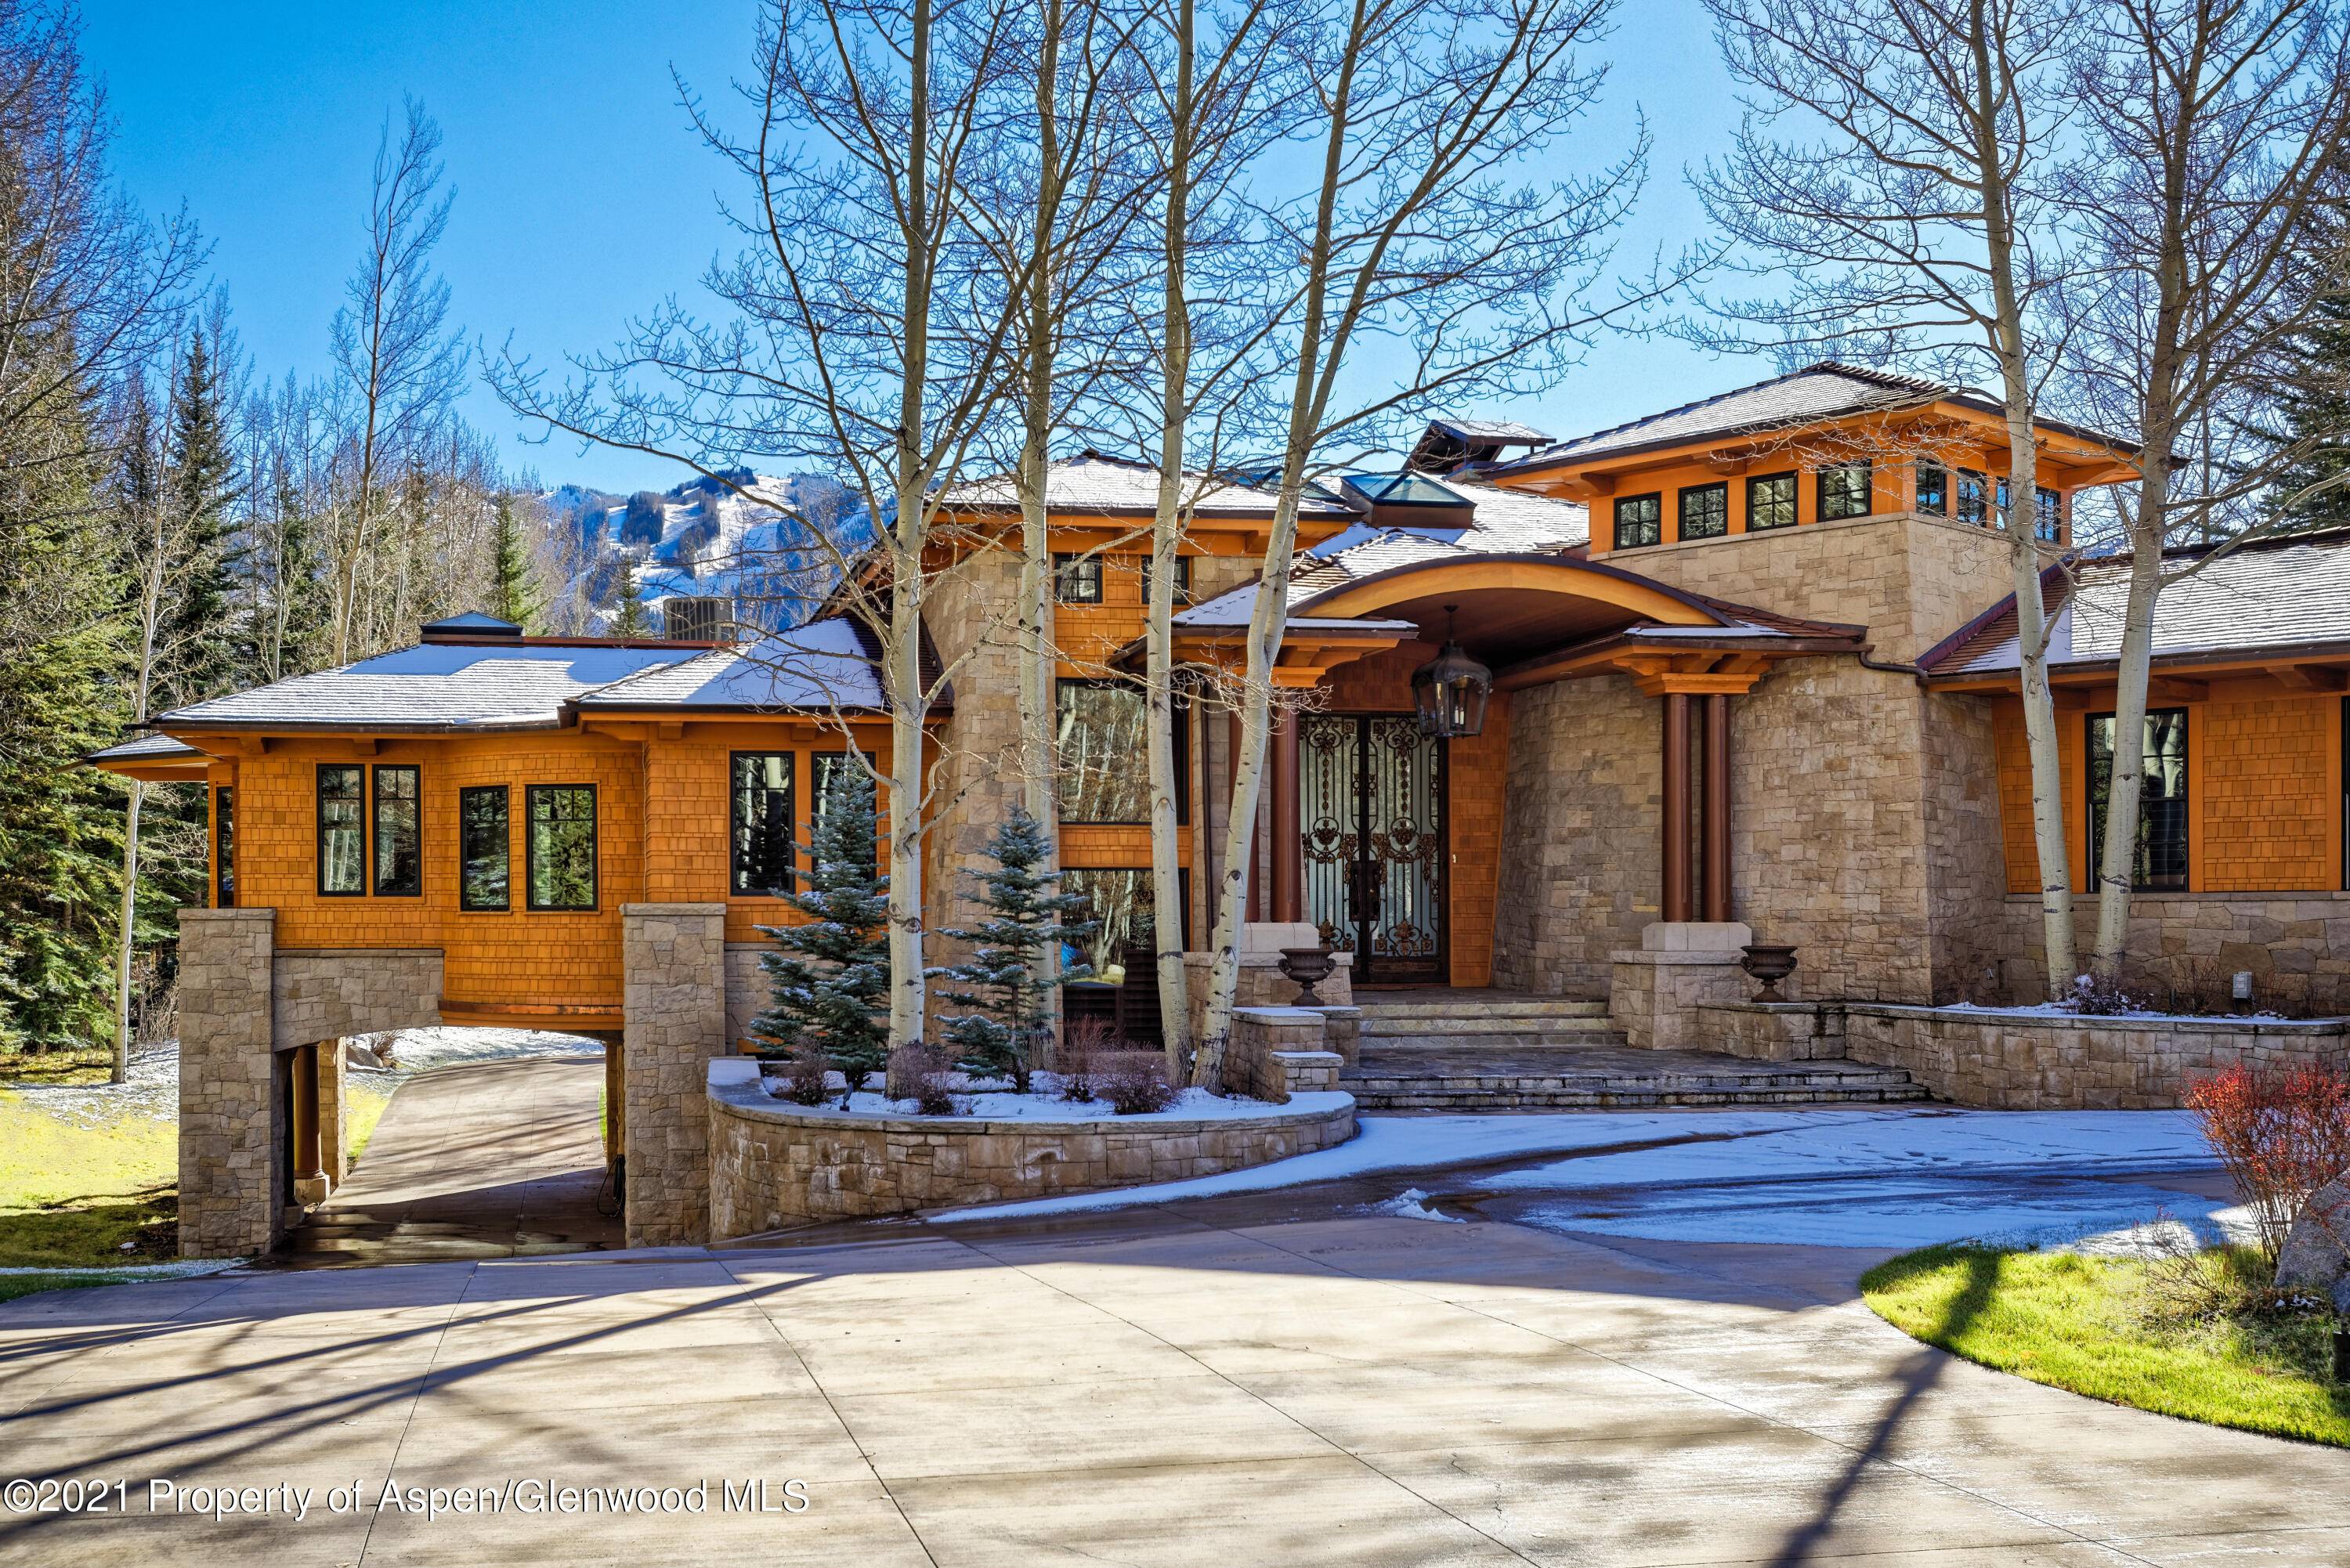 Enjoy dramatic, breathtaking views of Aspen and Highlands Mountains from this Red Mountain home situated on over an acre of land, with easy proximity to Aspen's core and the Rio ...